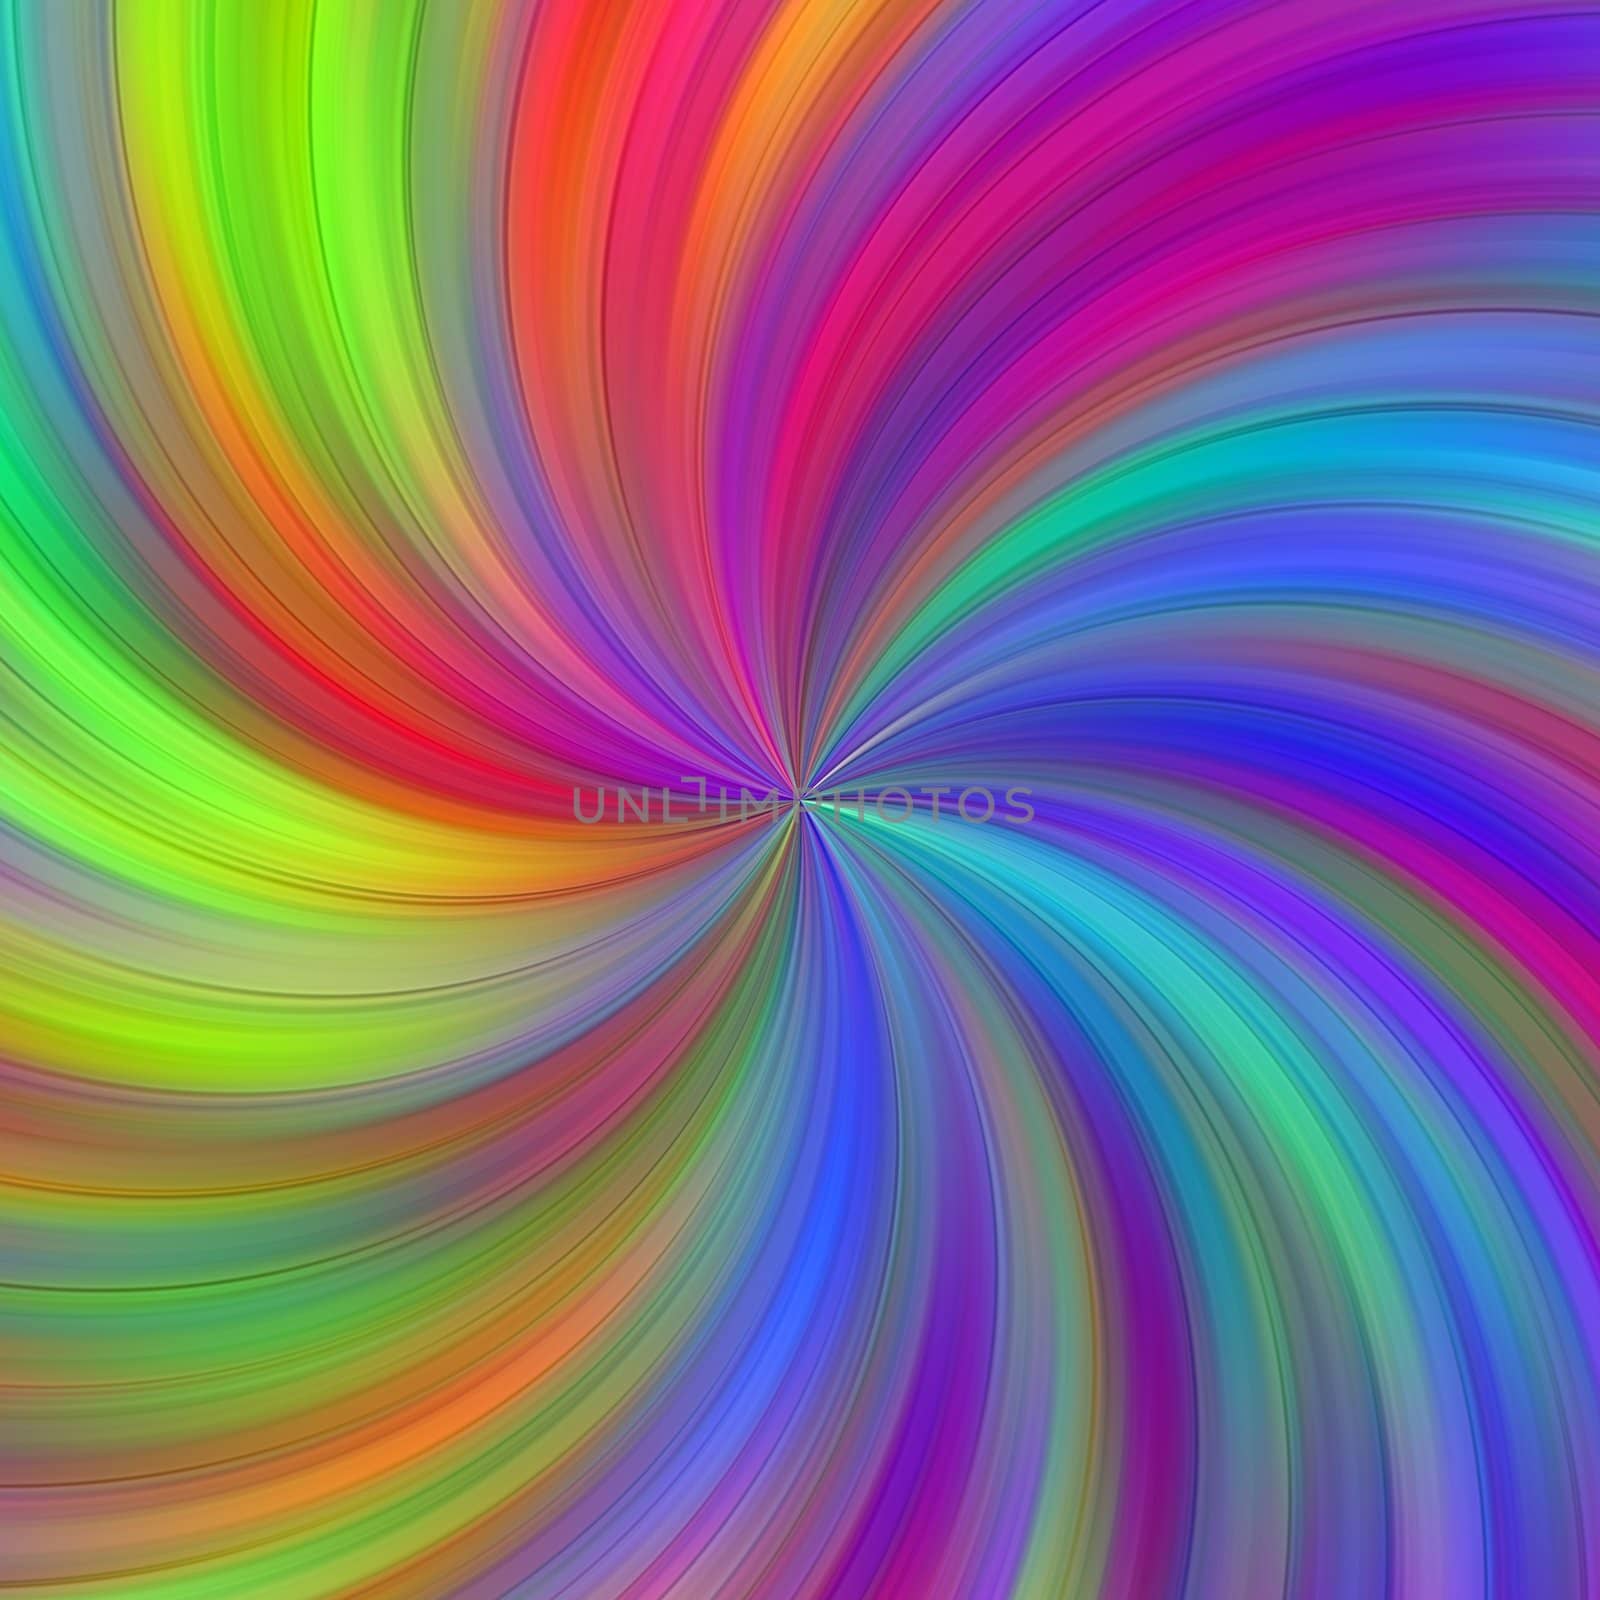 texture of many bright colors in a centered whirlpool